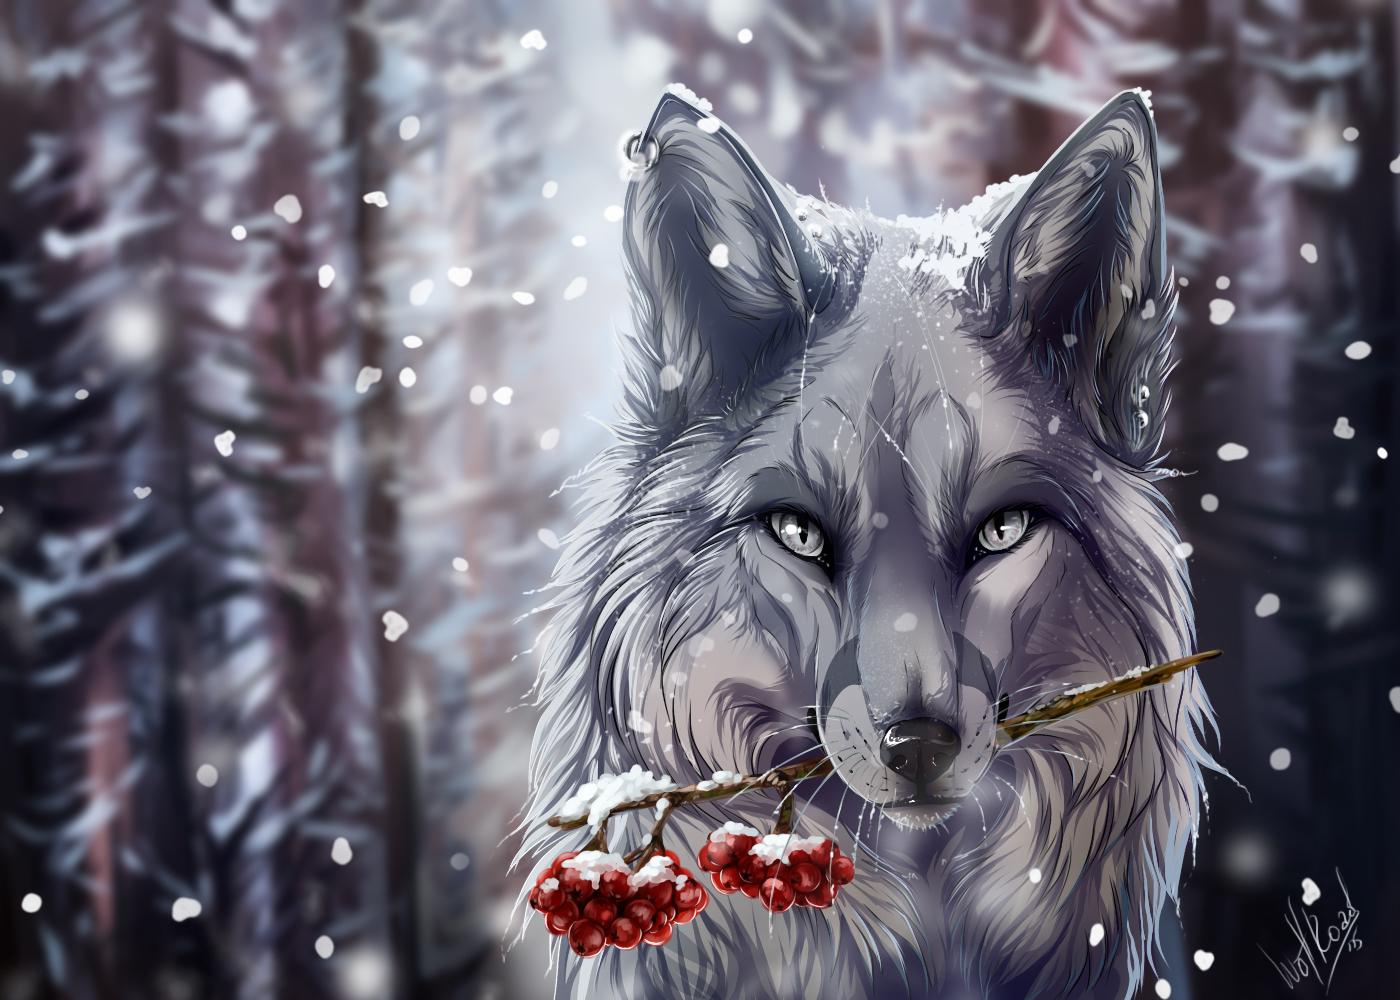 Free download Fantasy Winter Wolf Wallpapers DreamLoveWallpapers.